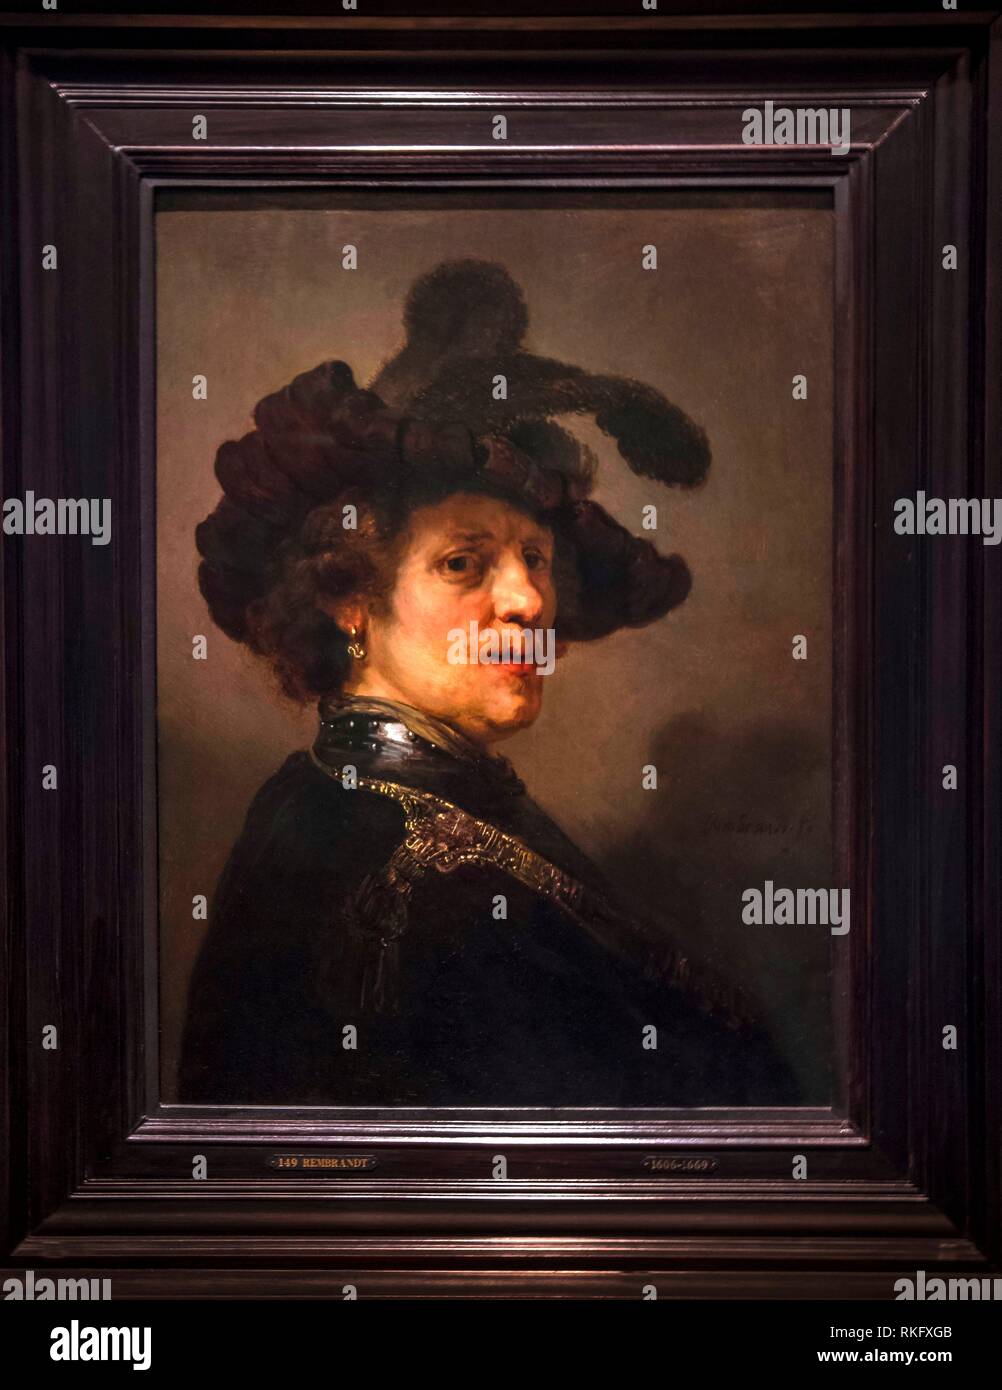 Nedherlands, Den Haag- Mauritshuis Museum: ''Troute'' of a man with a Feathered Beret,(ca.1635-1640) by Rembrandt. Stock Photo